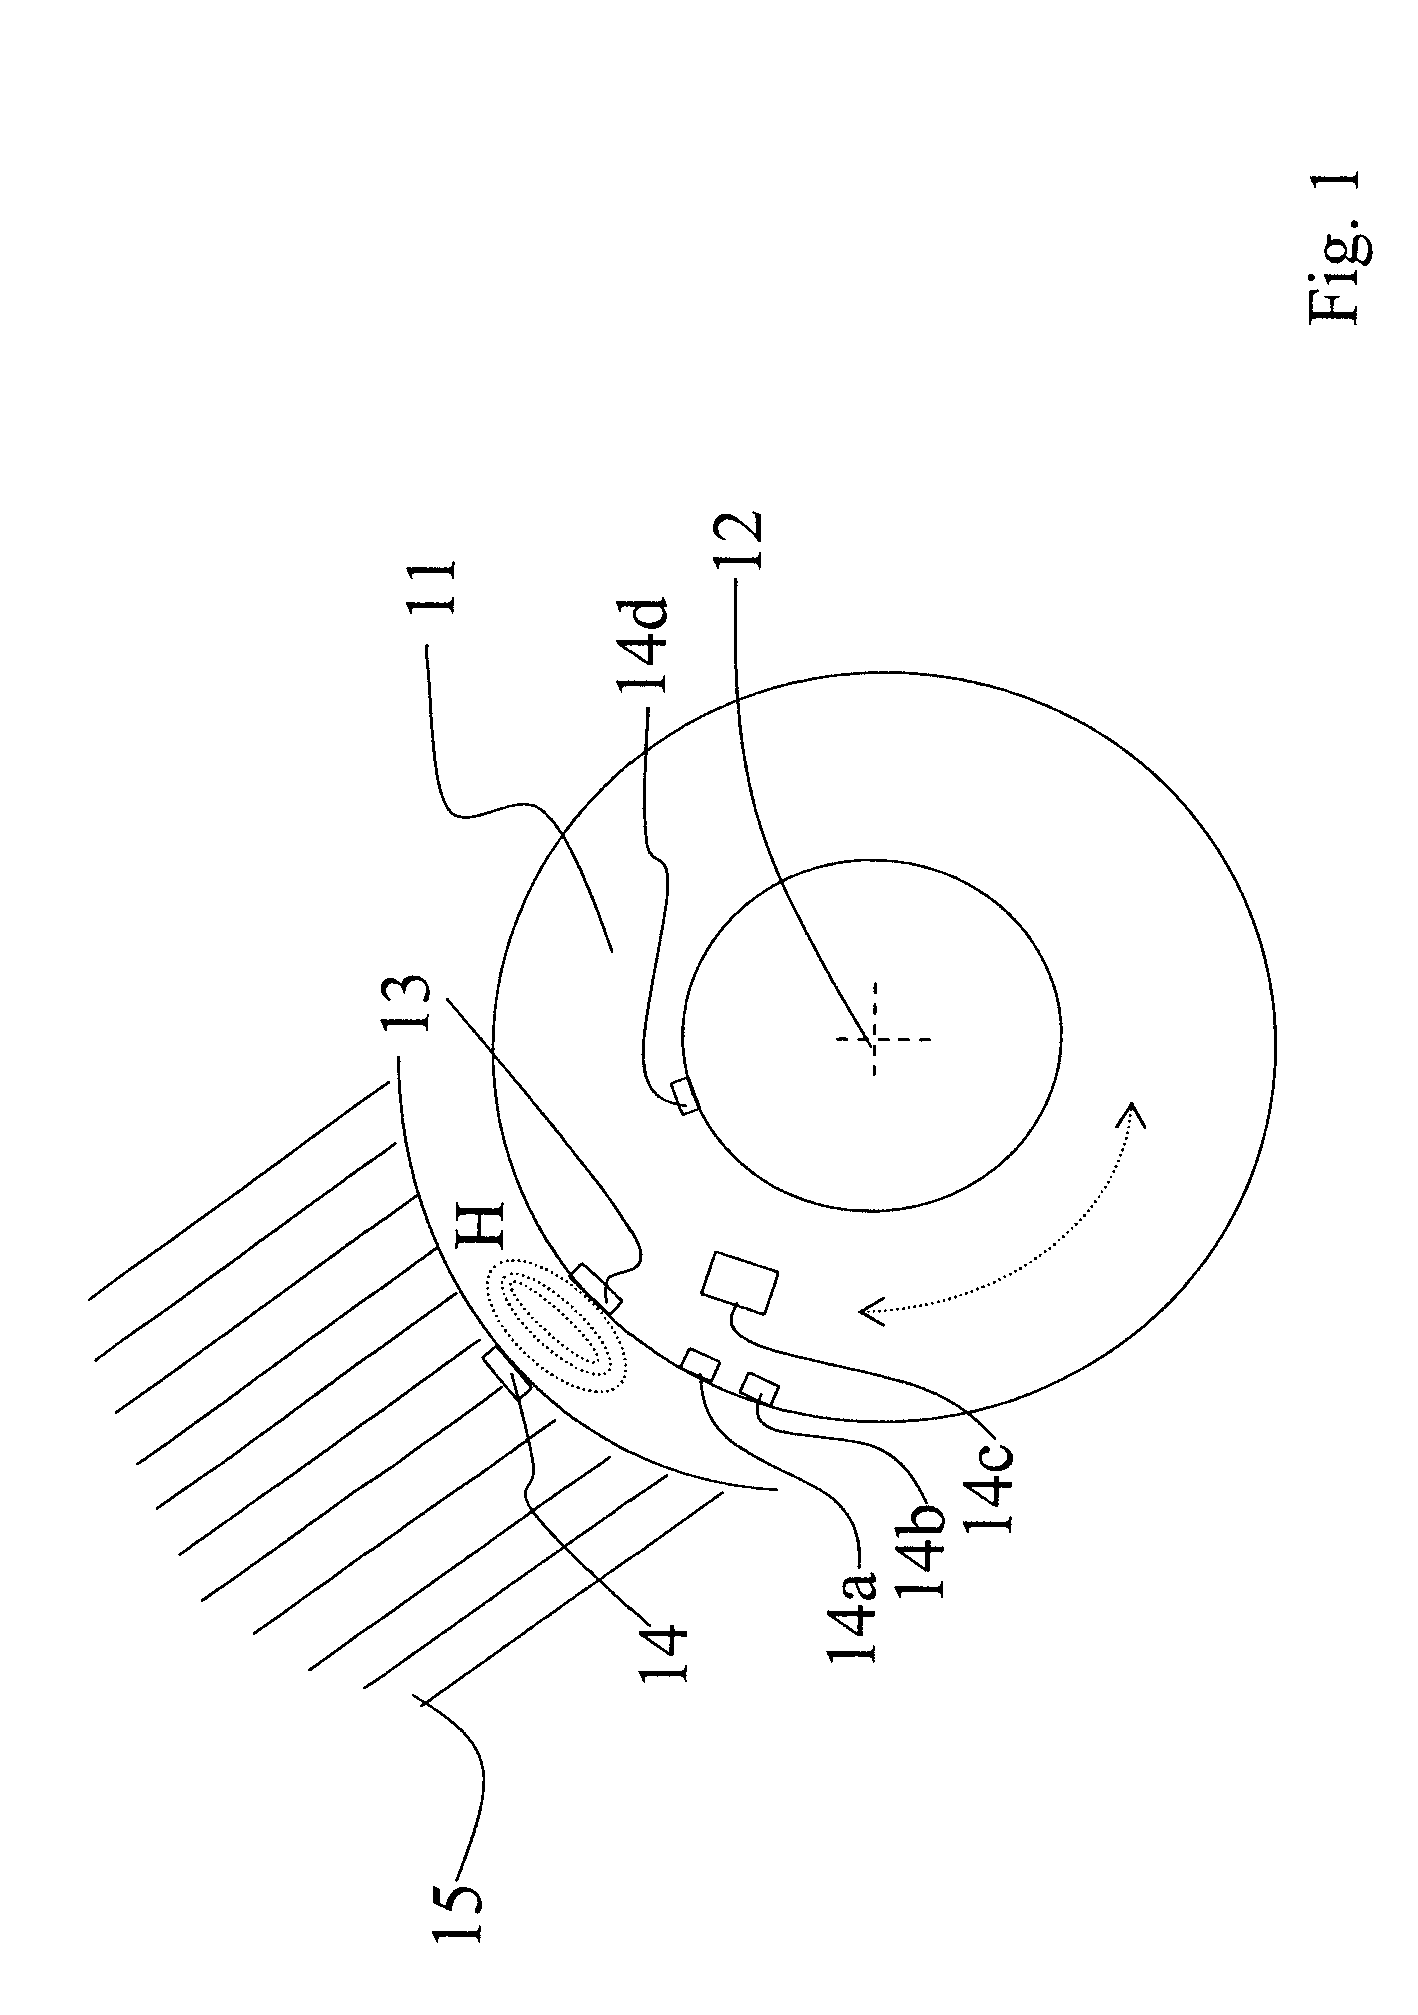 Pressure sensing device for rotatably moving parts and pressure detection method therefor